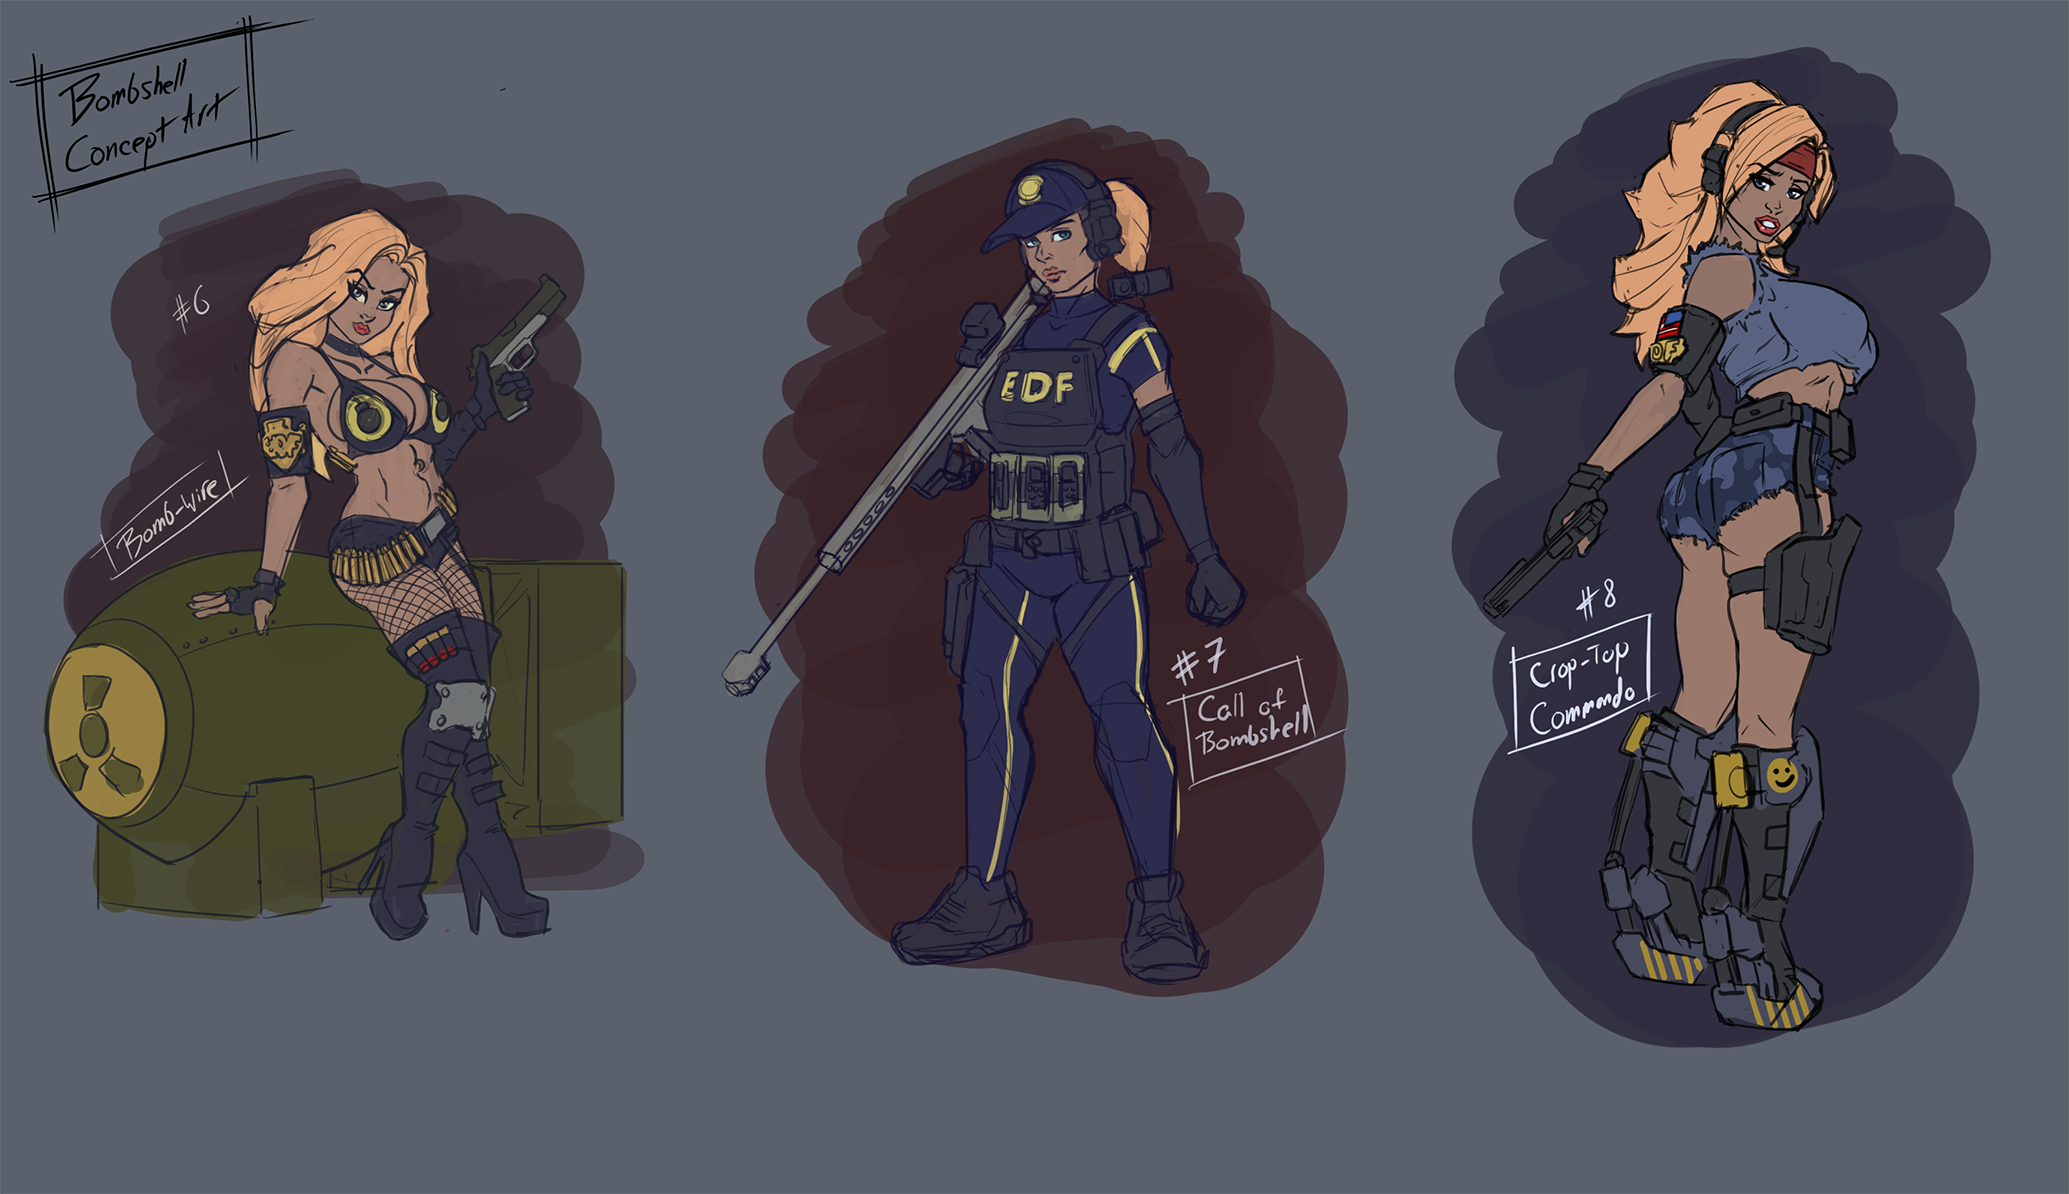 Bombshell Concepts2